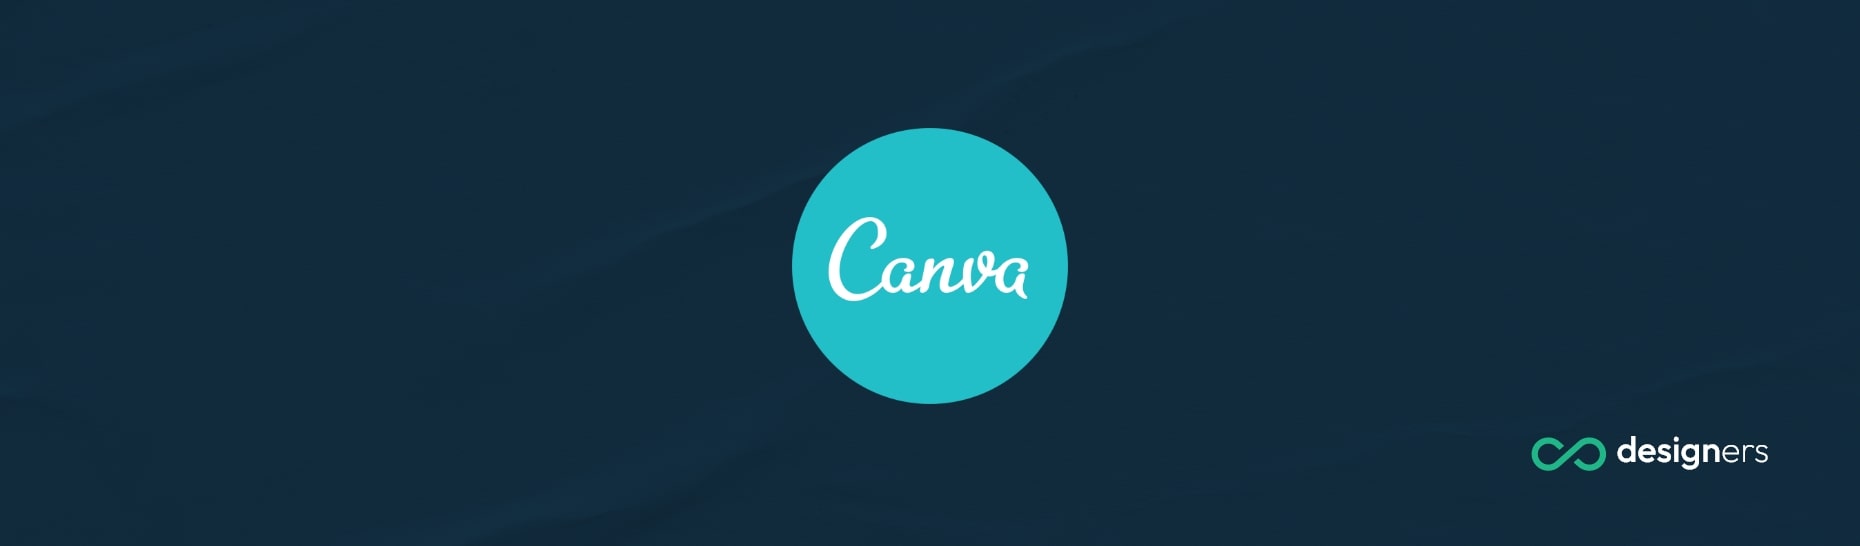 Can I Use Canva to Advertise?